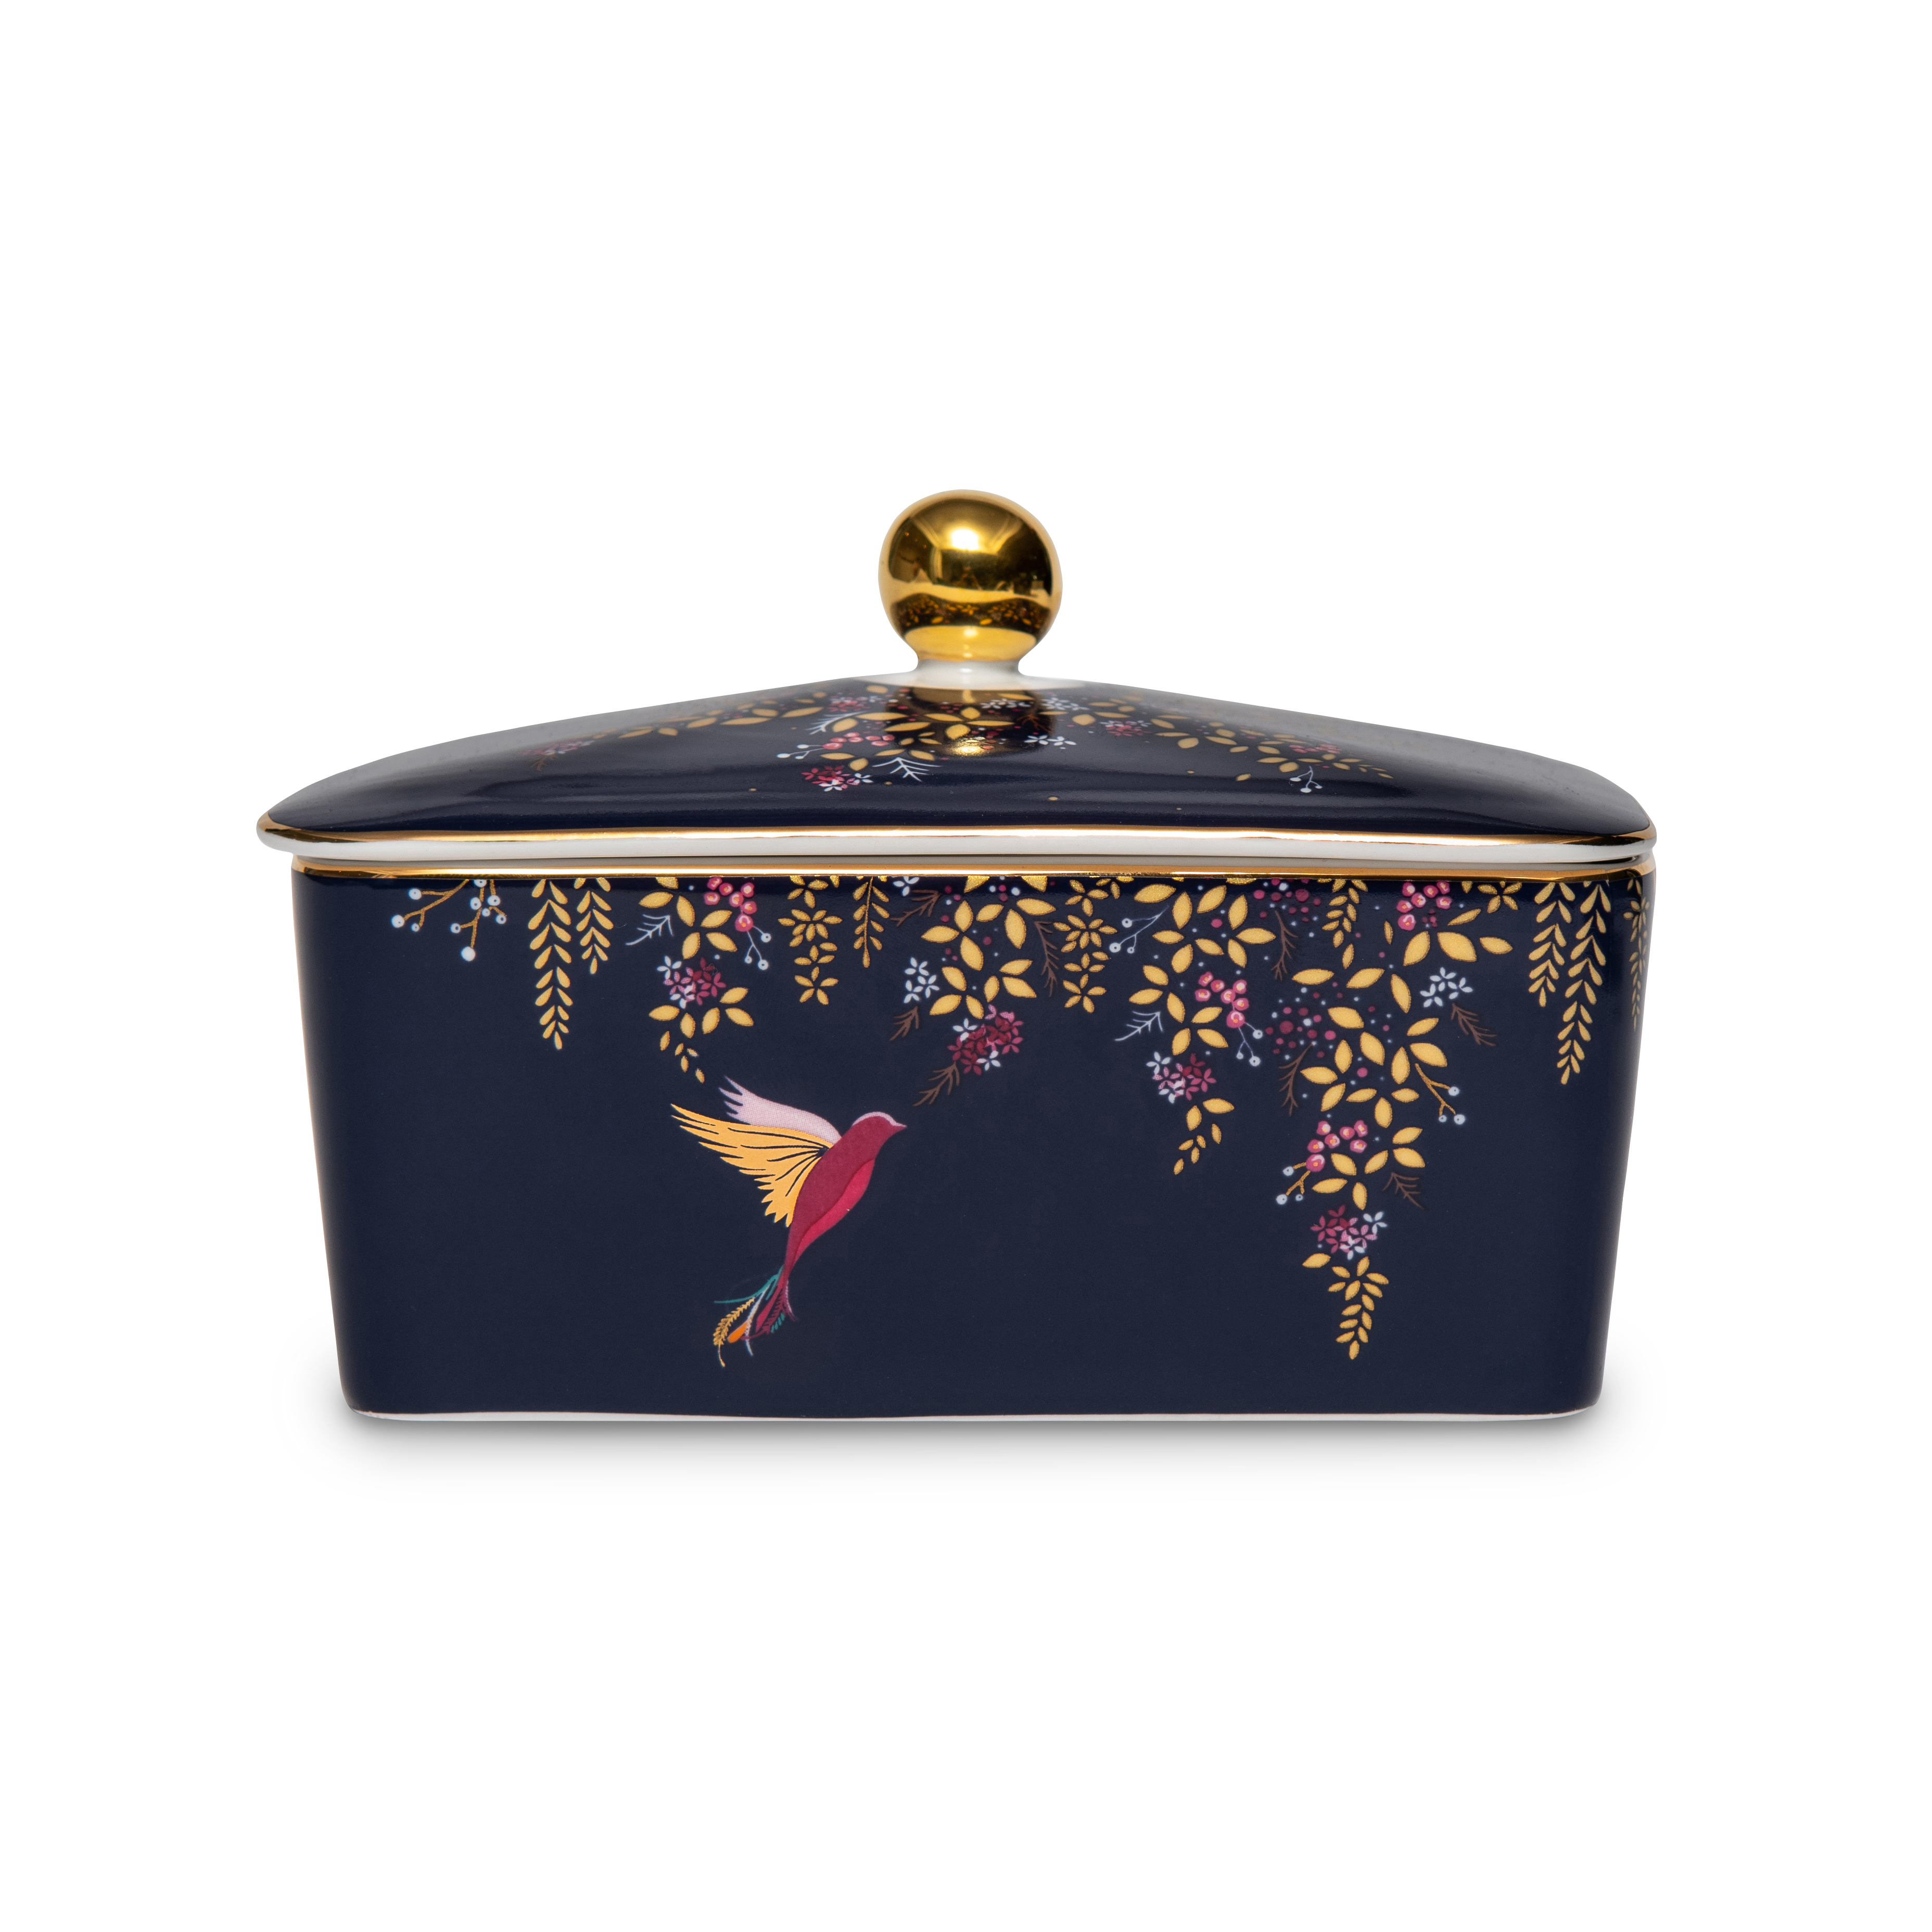 Sara Miller London Chelsea Covered Butter (Navy) image number null